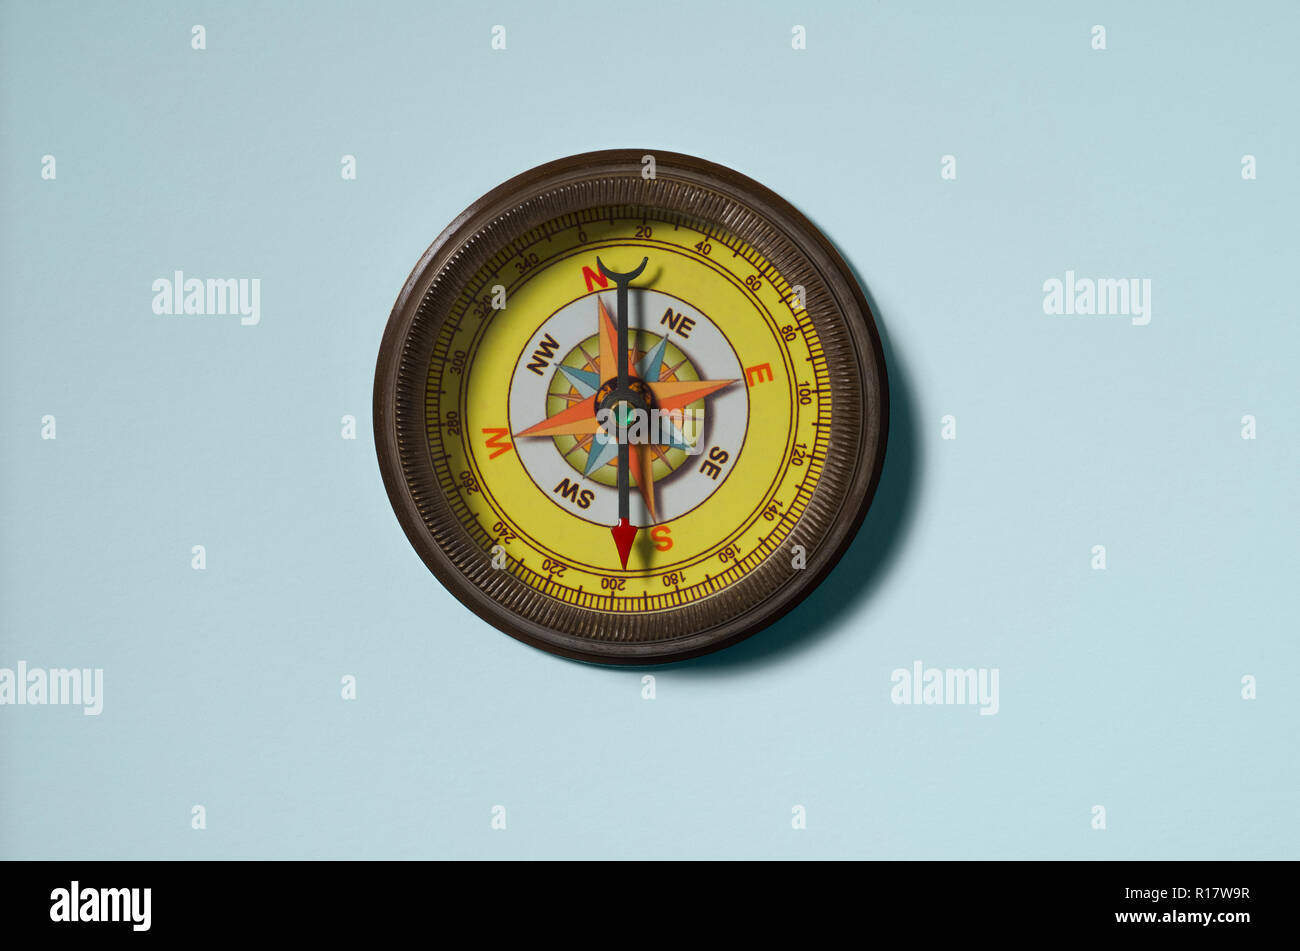 Magnetic compass with yellow face pointing towards south, white background Stock Photo